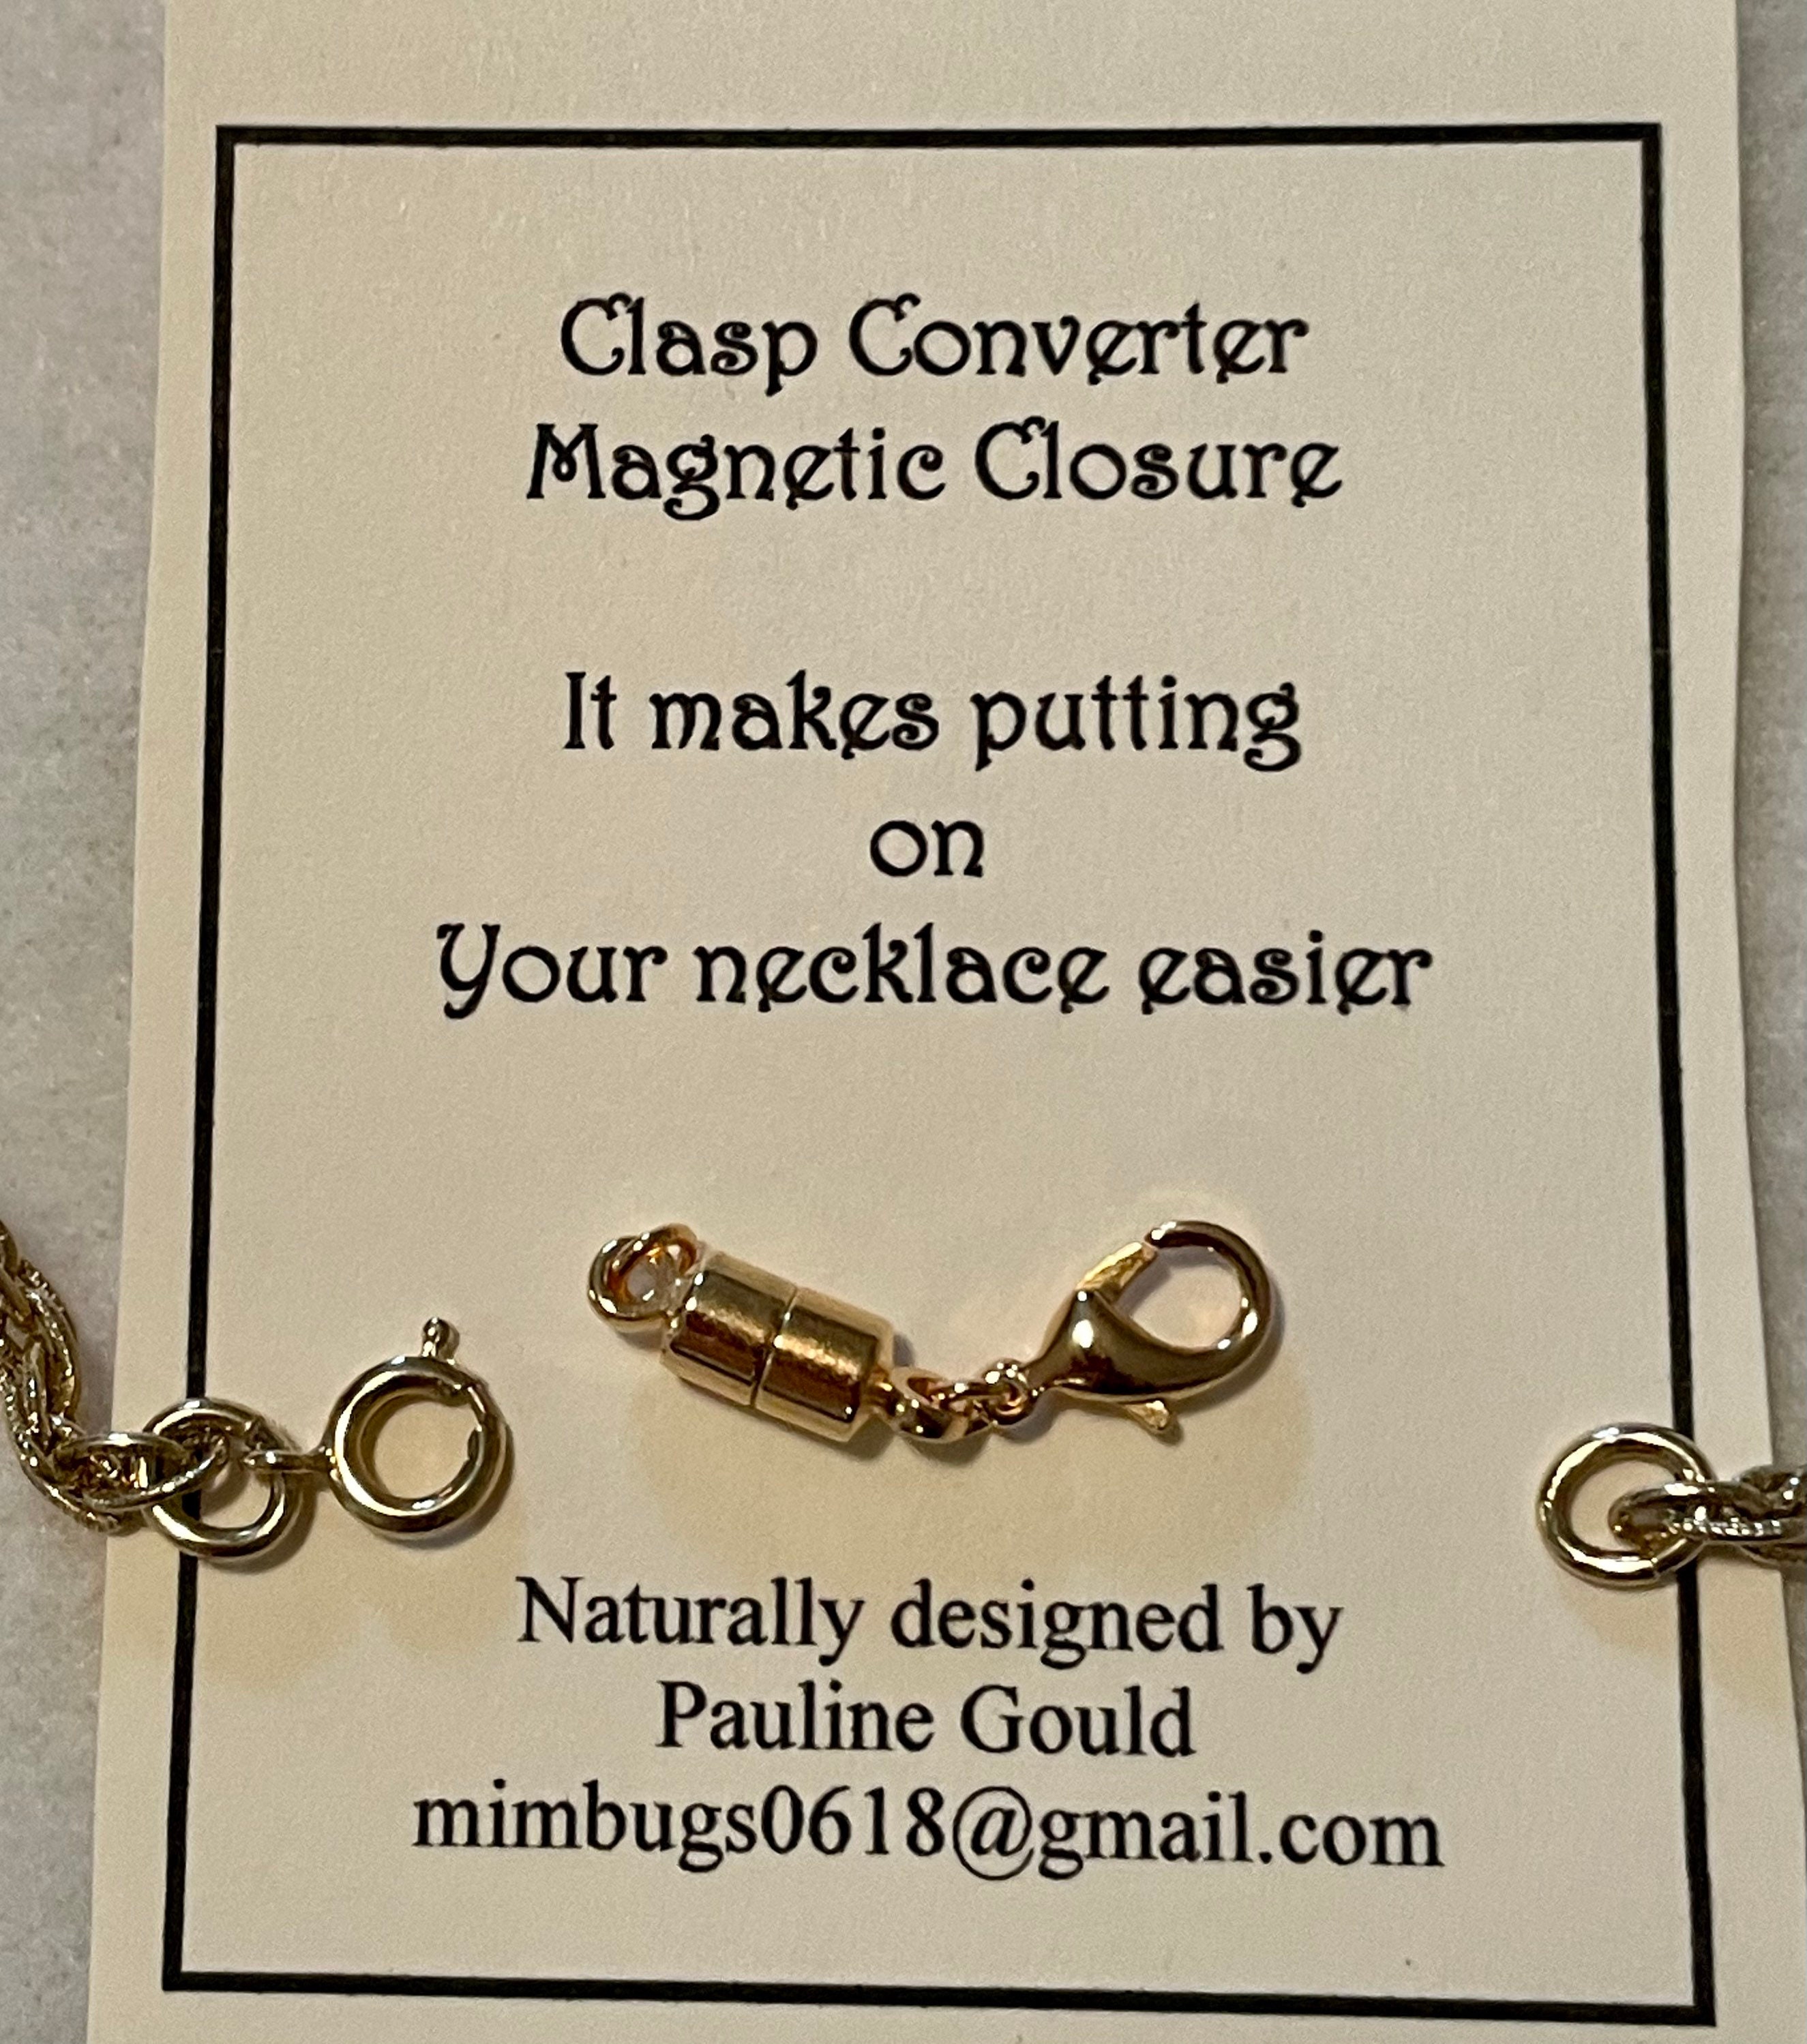 MAGNETIC NECKLACE CLASPS And Closures - Chain Extender Jewelry Clasp  Converter £4.39 - PicClick UK